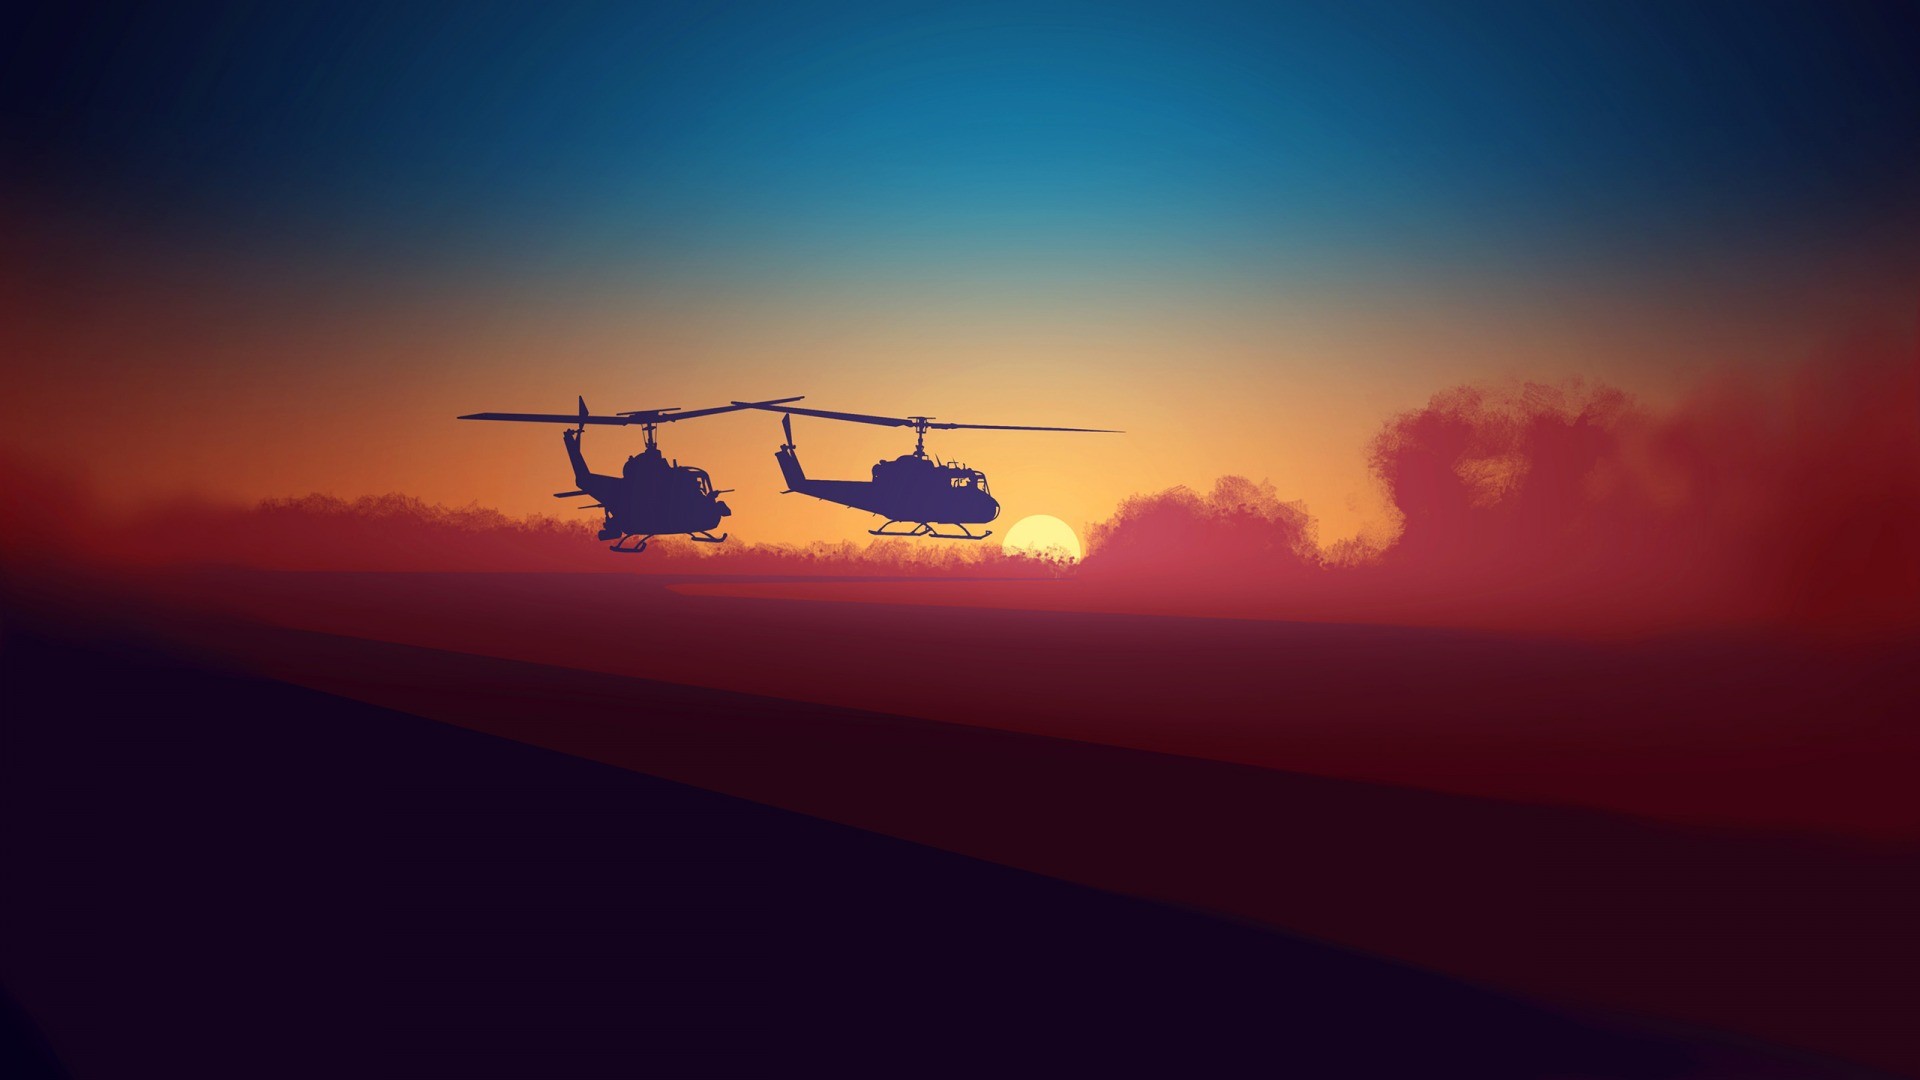 artwork, Helicopters, Colorful, Sunrise, Sand, UH 1, Huey Helicopter Wallpaper